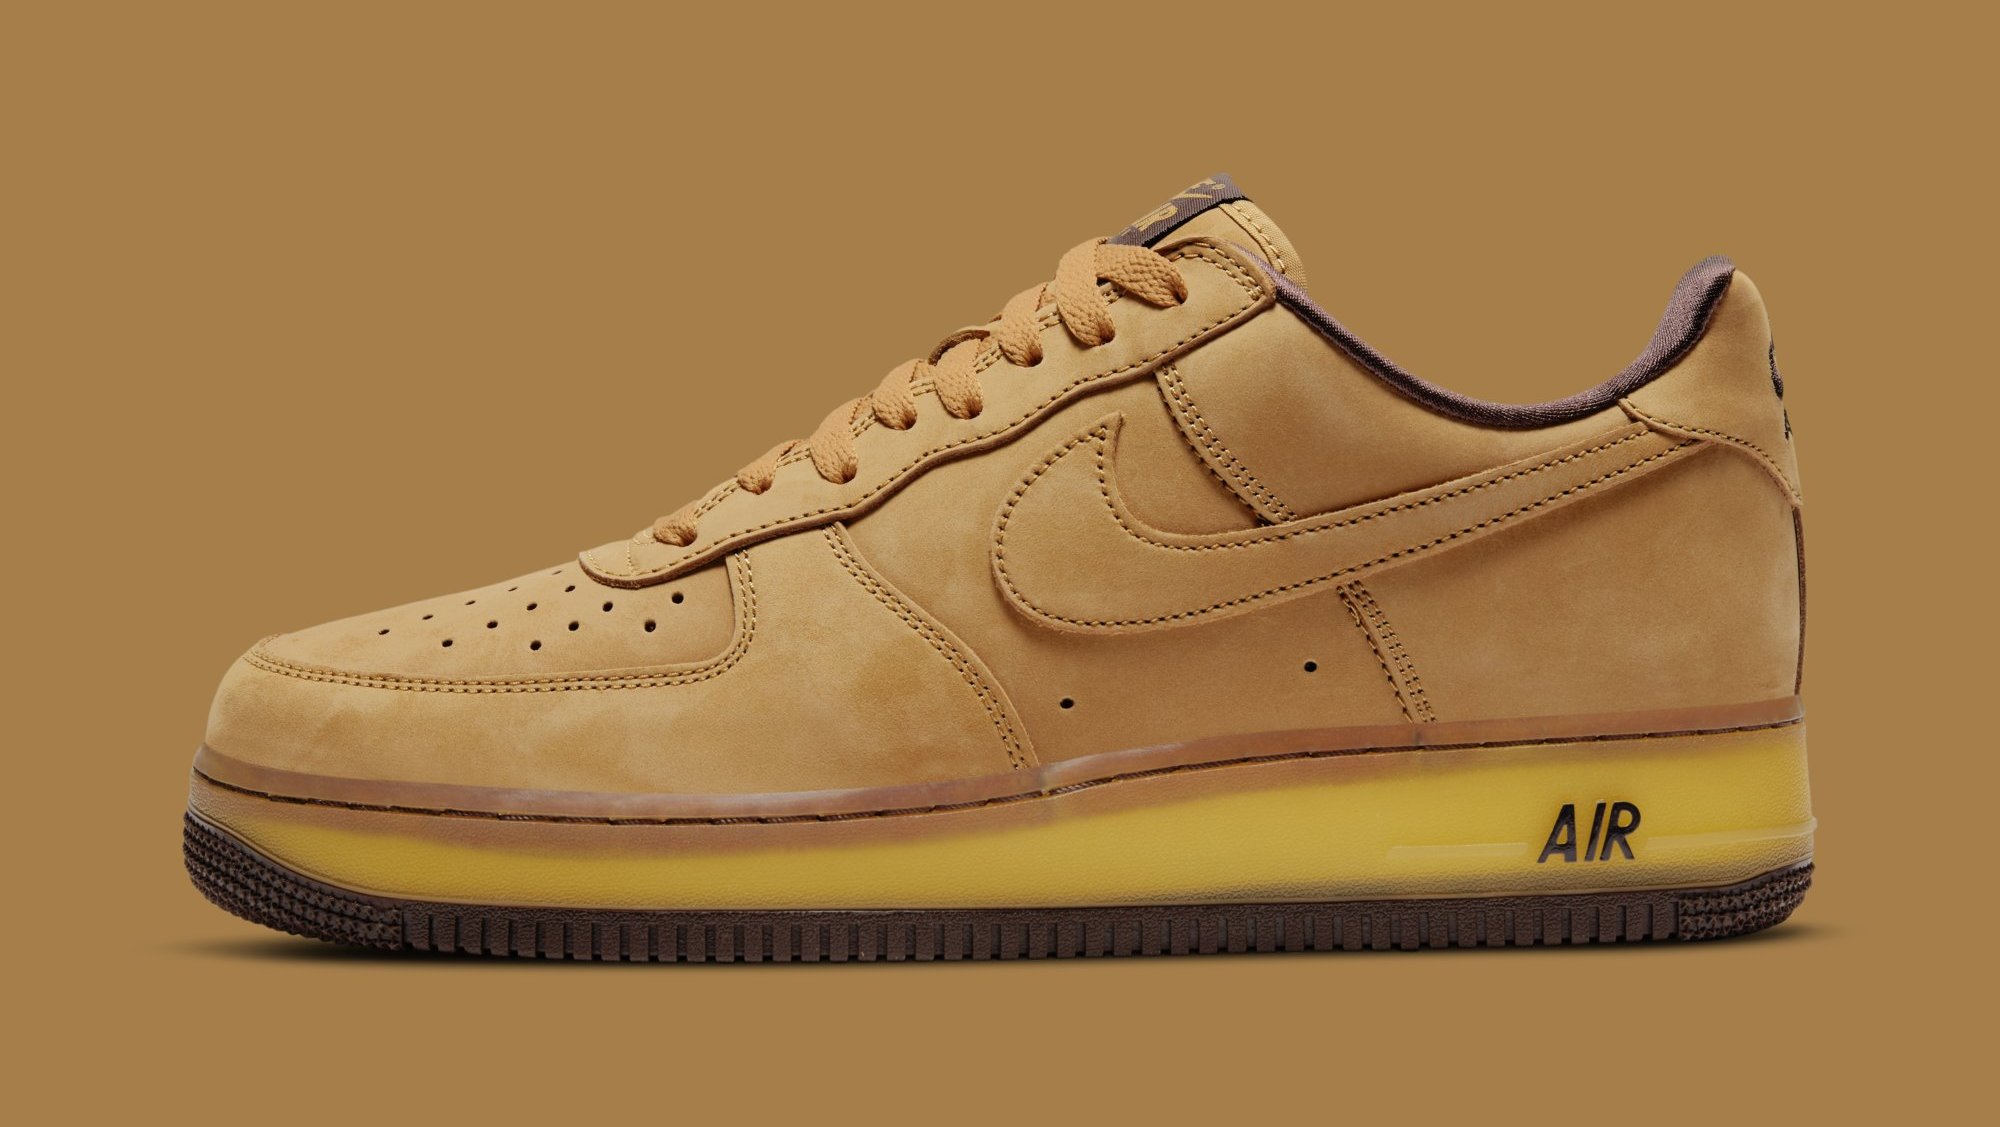 Nike Air Force 1 Low CO.JP &#x27;Wheat Mocha&#x27; DC7504 700 Lateral